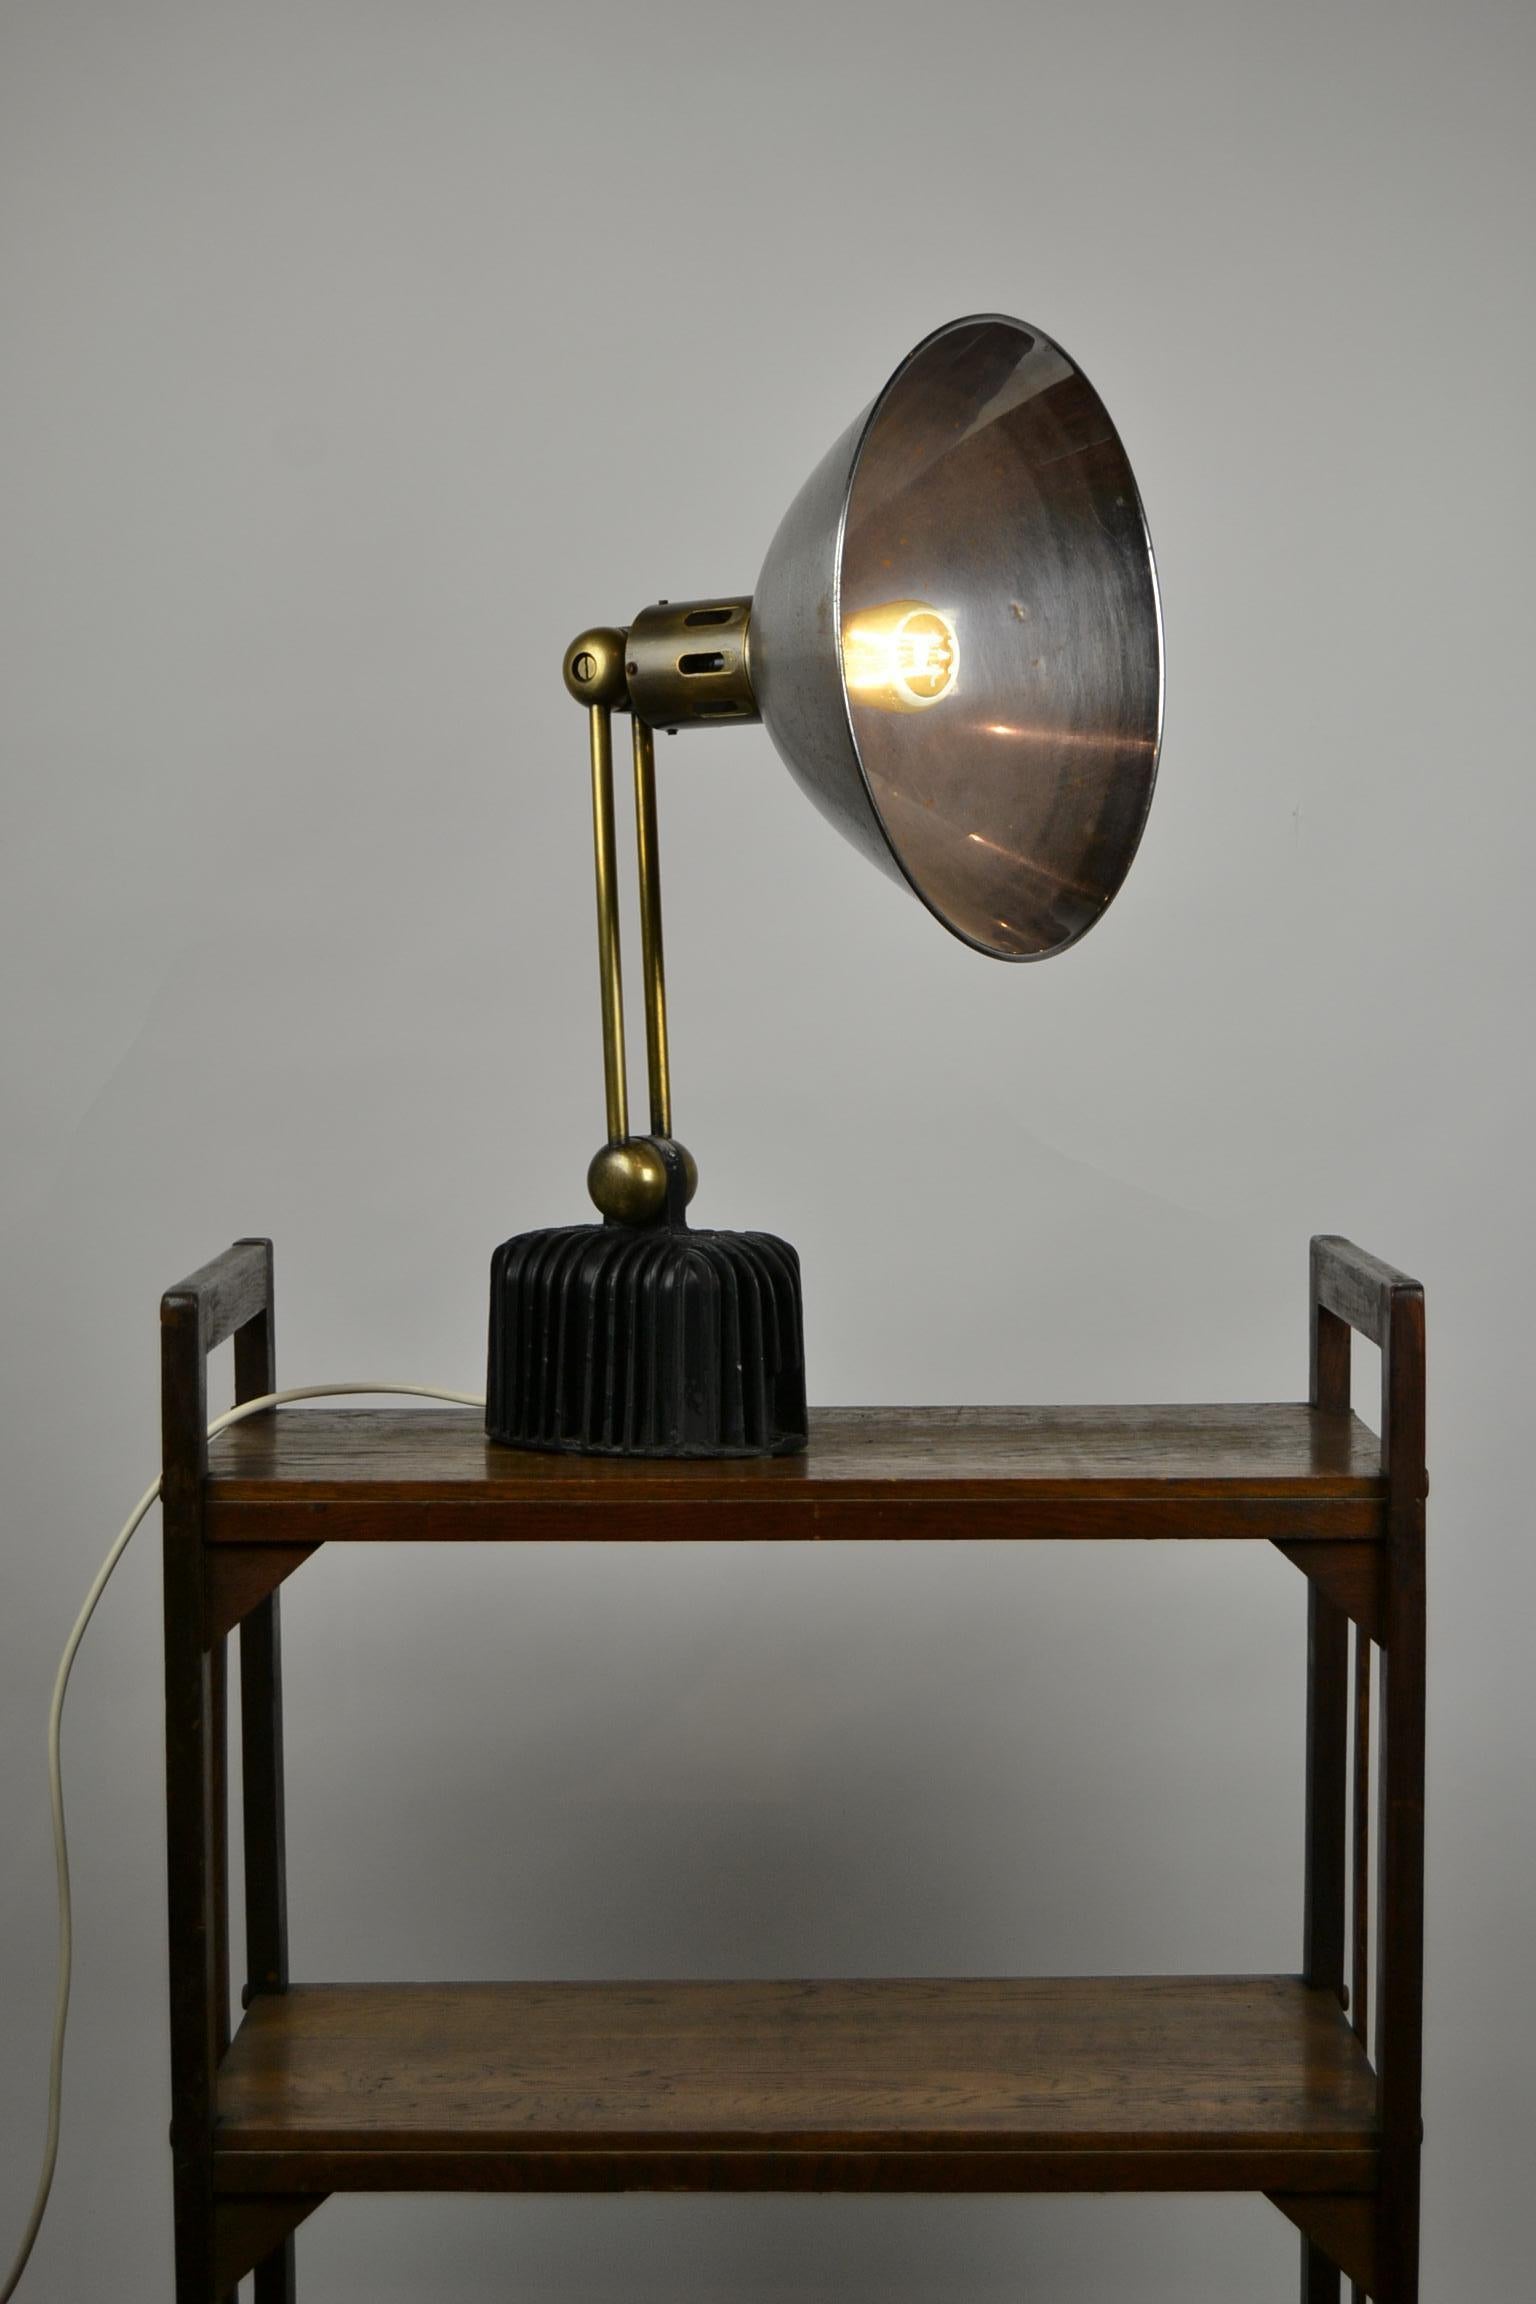 Awesome former Ultrasol sun-ray lamp reconstructed into a stunning table lamp, wall light. Can also be used as an up and down lighter.
This 1930s Sun Lamp was the first Product made for Personal maintenance by Philips. Because of his beautiful